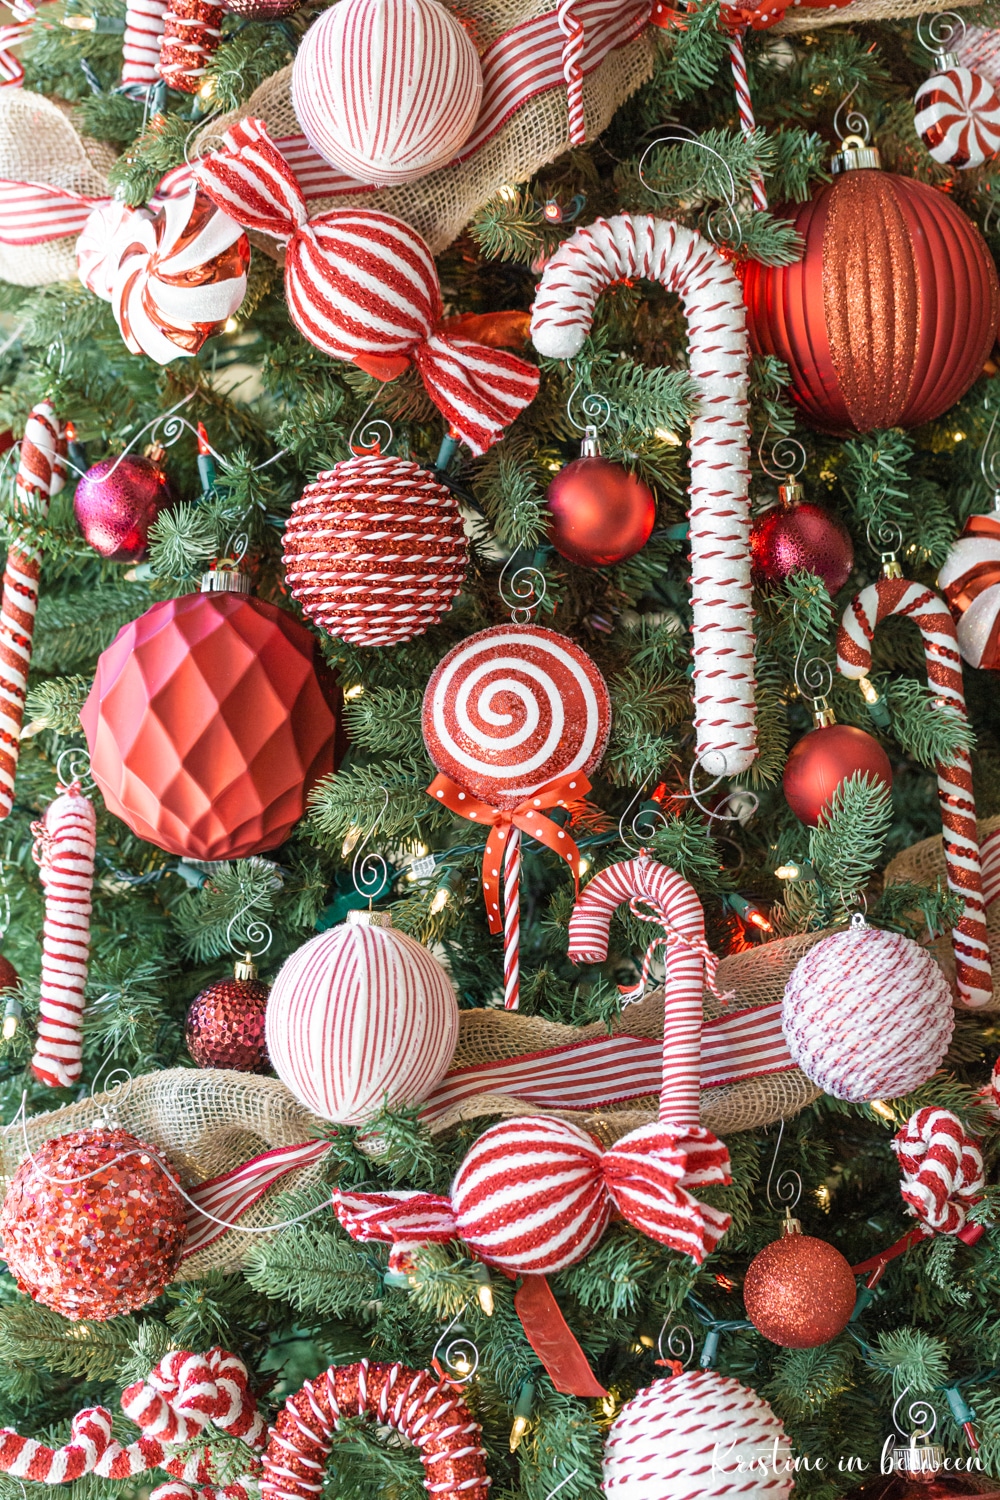 Red and white candy cane ornaments hanging on a Christmas tree.